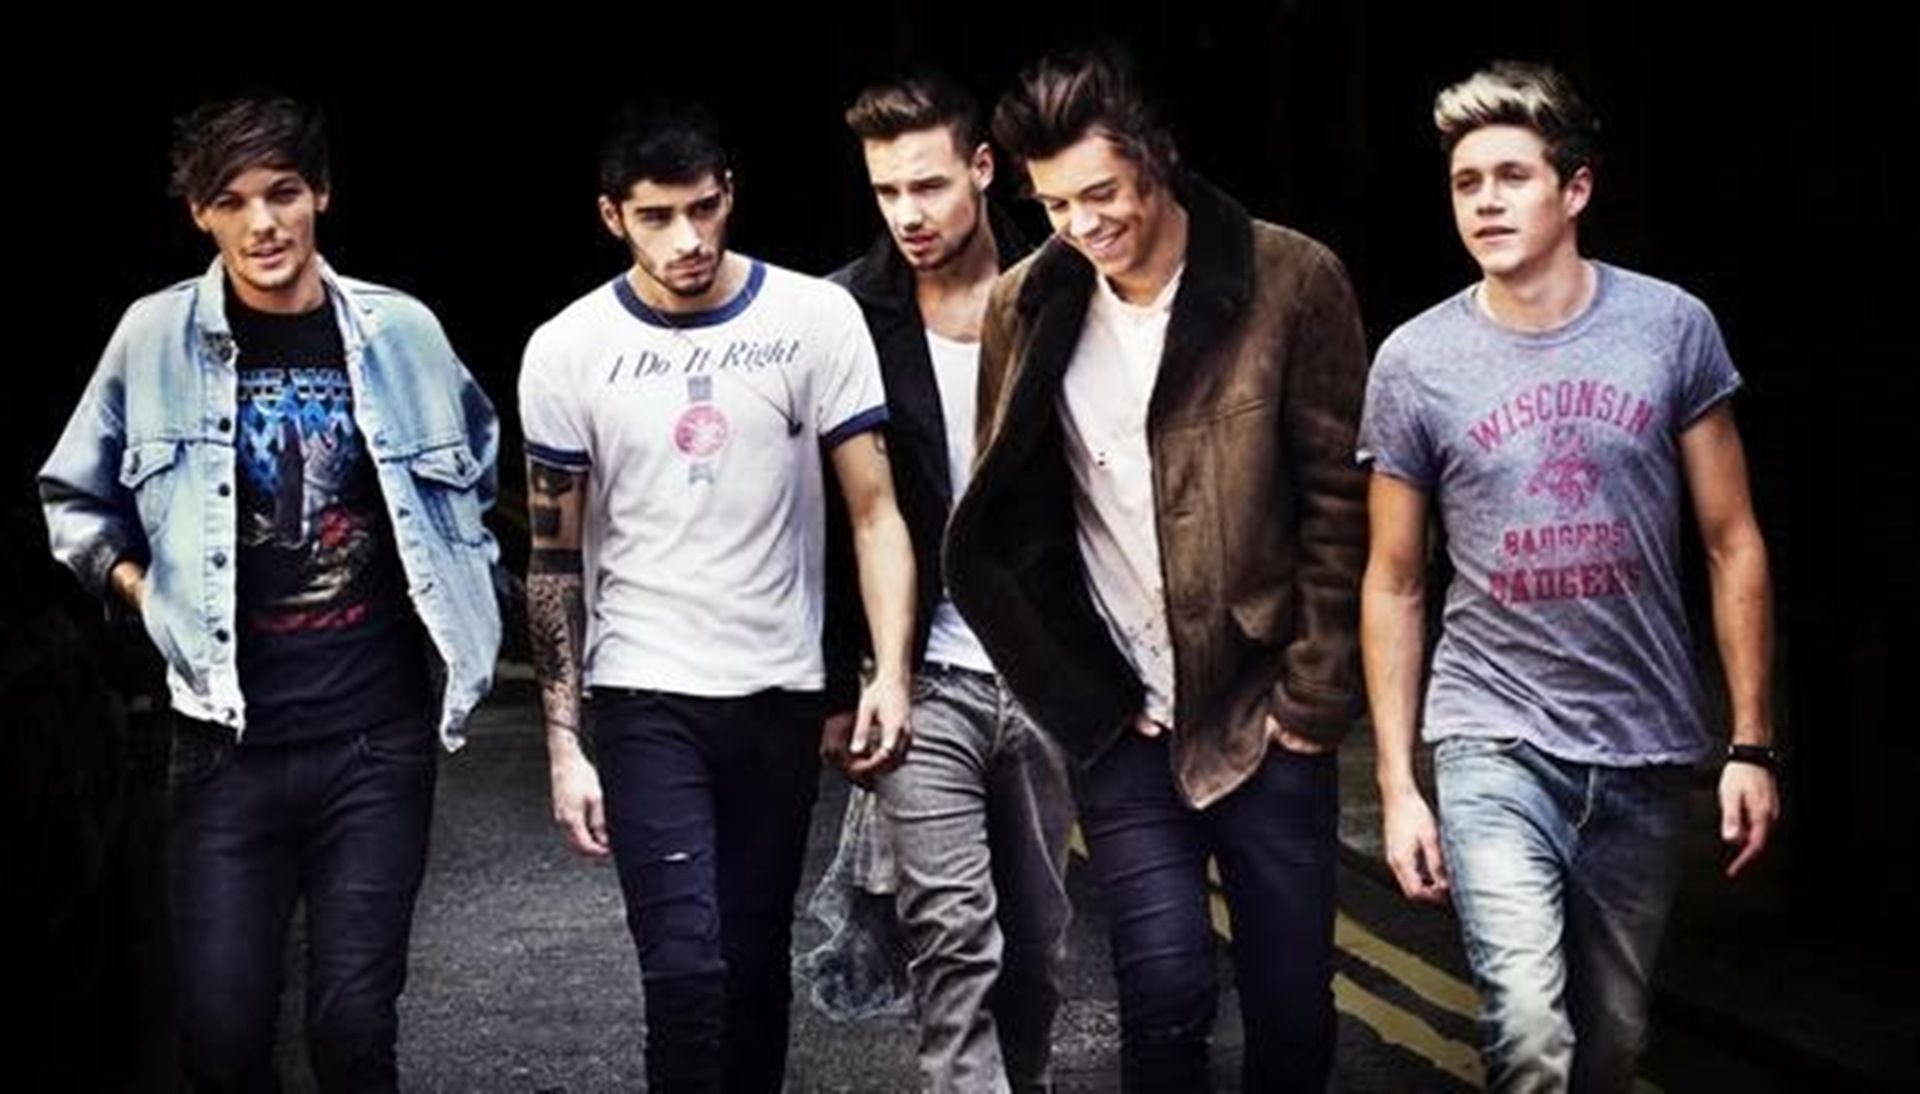 Free download Image One Direction 2014 Boy Band Wallpaper 2014 One